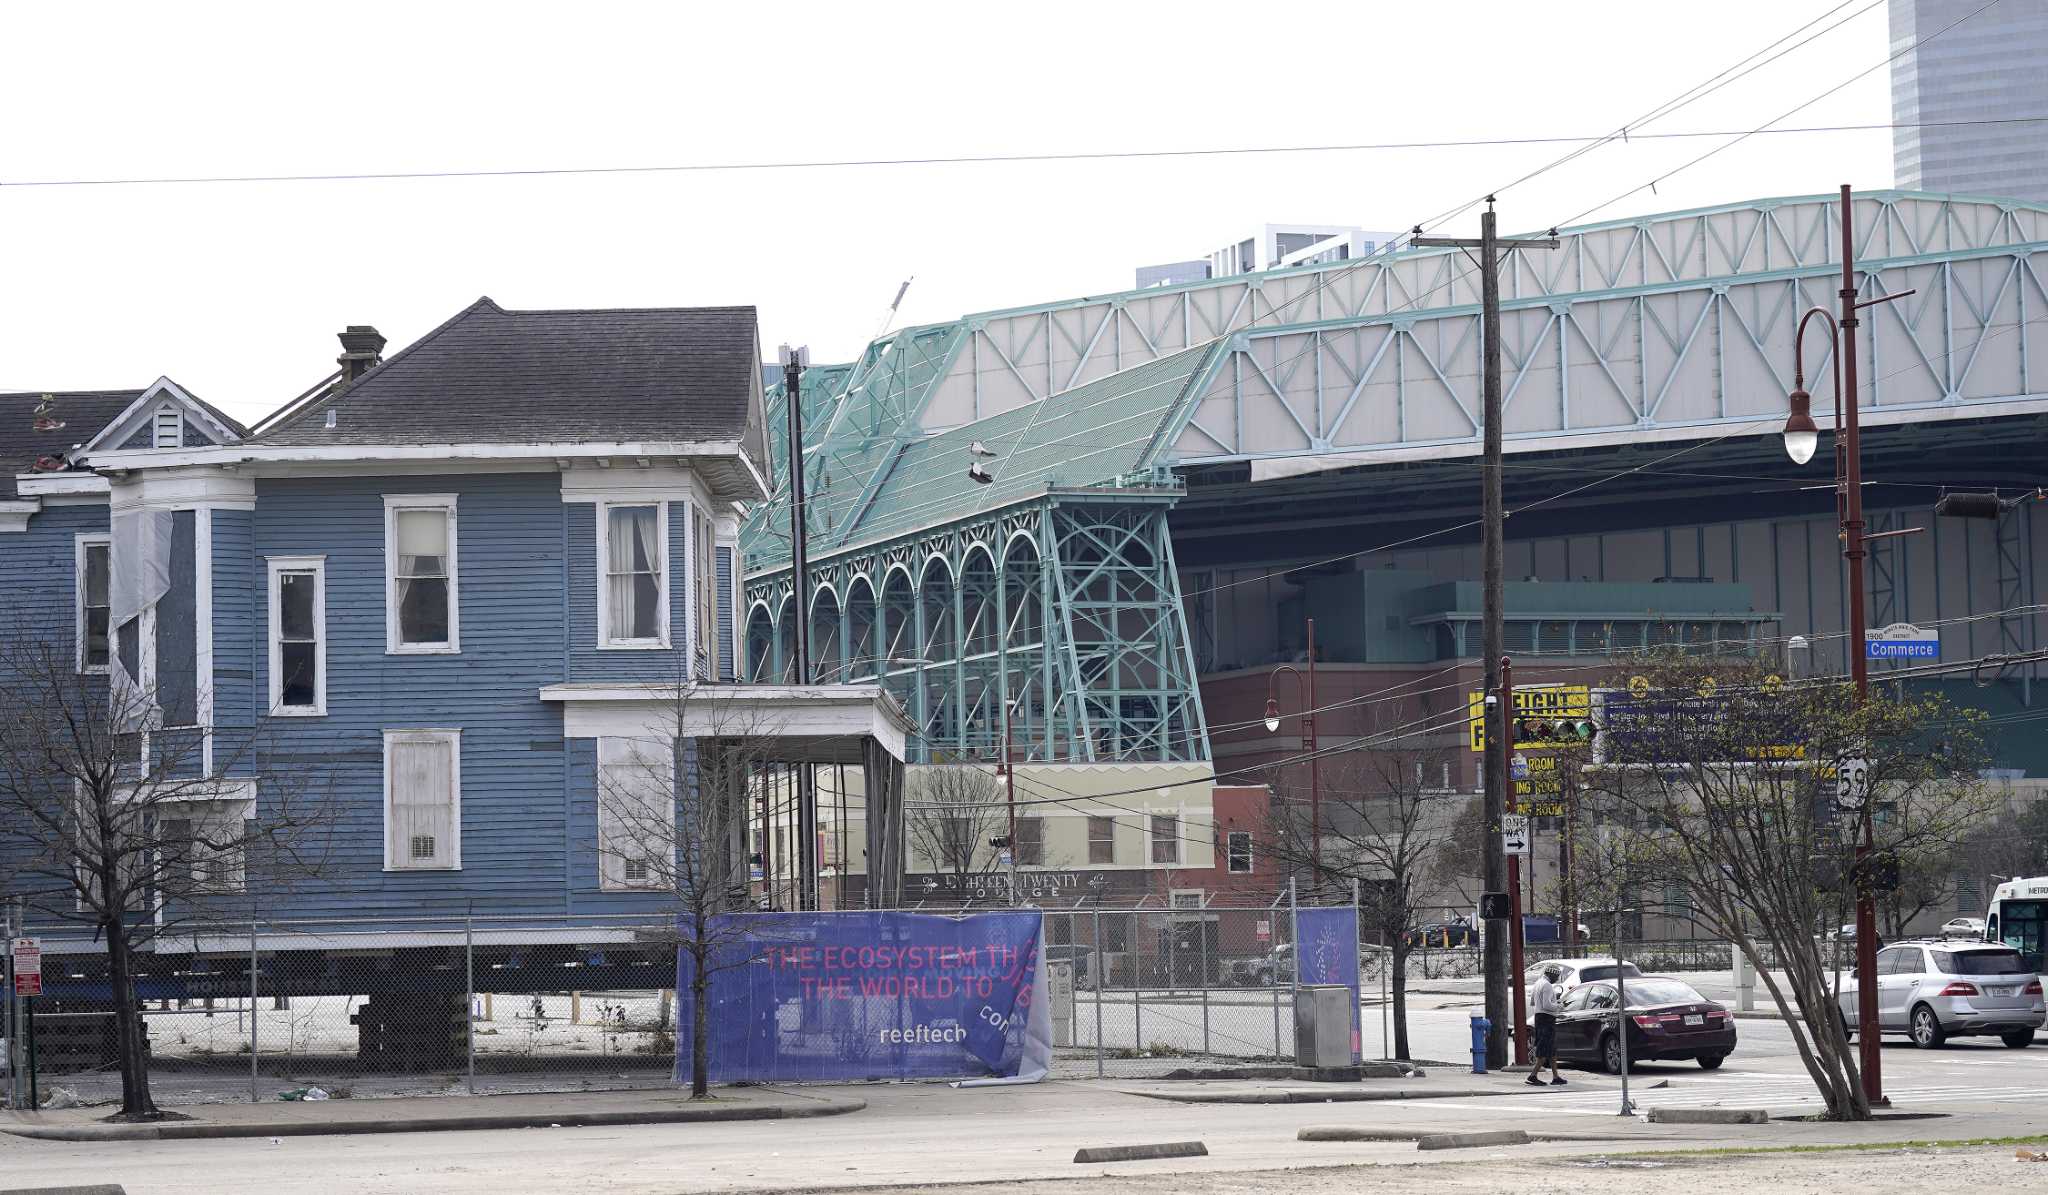 Ever Wondered What the Blue House Next to Minute Maid Park Is?